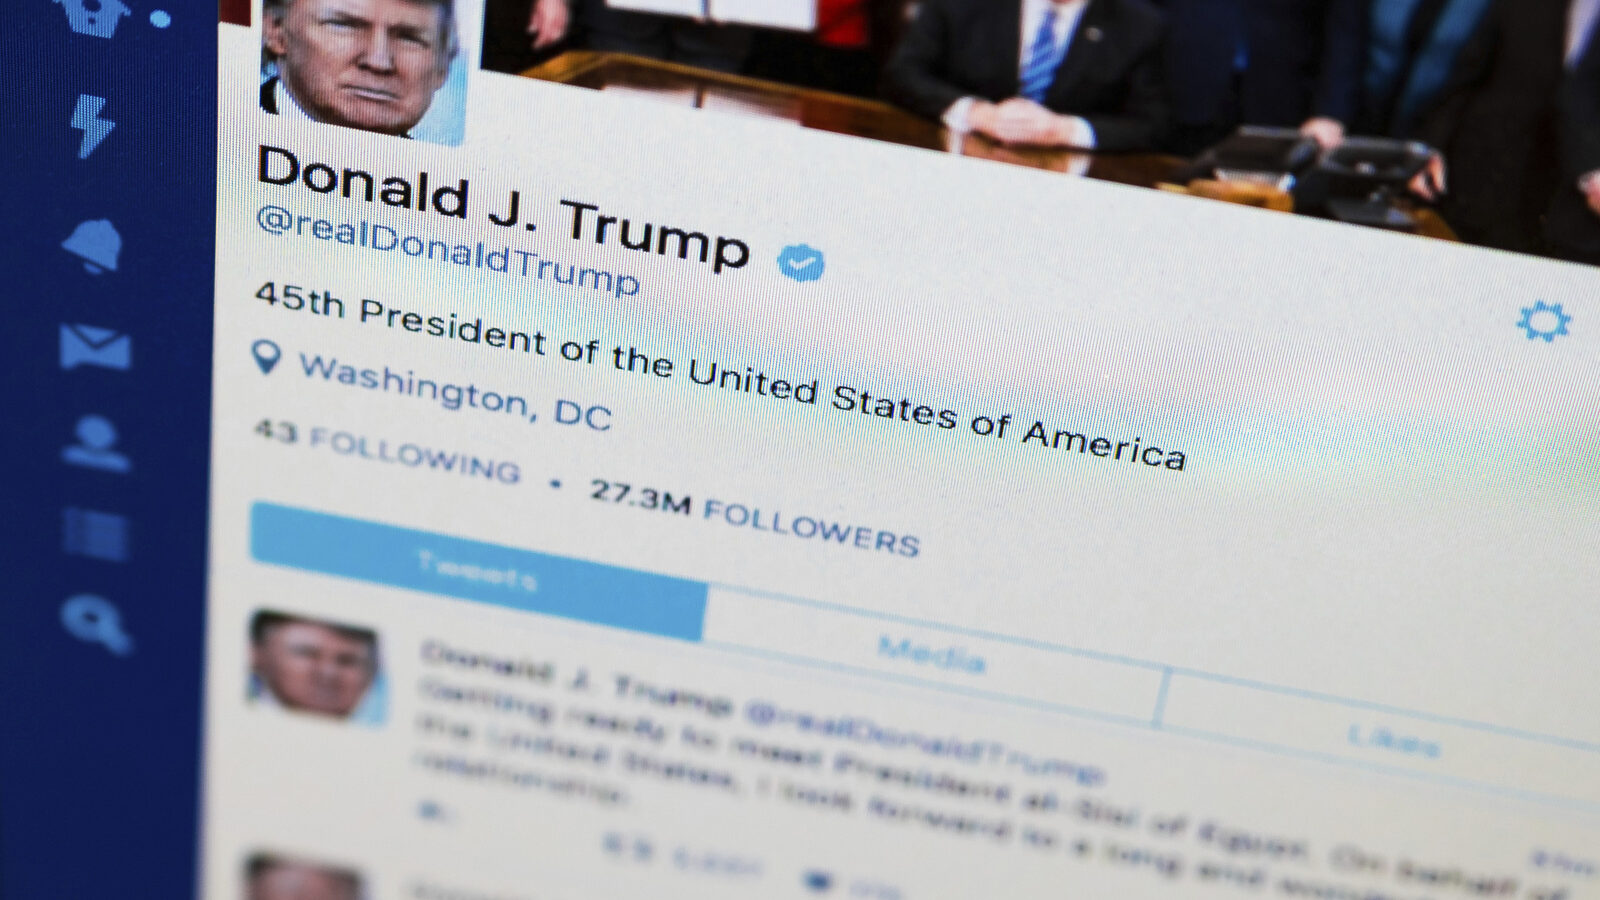 President Donald Trump's Twitter feed. Twitter users say Trump is violating the First Amendment by blocking people from his feed after they posted scornful comments. (AP/J. David Ake)